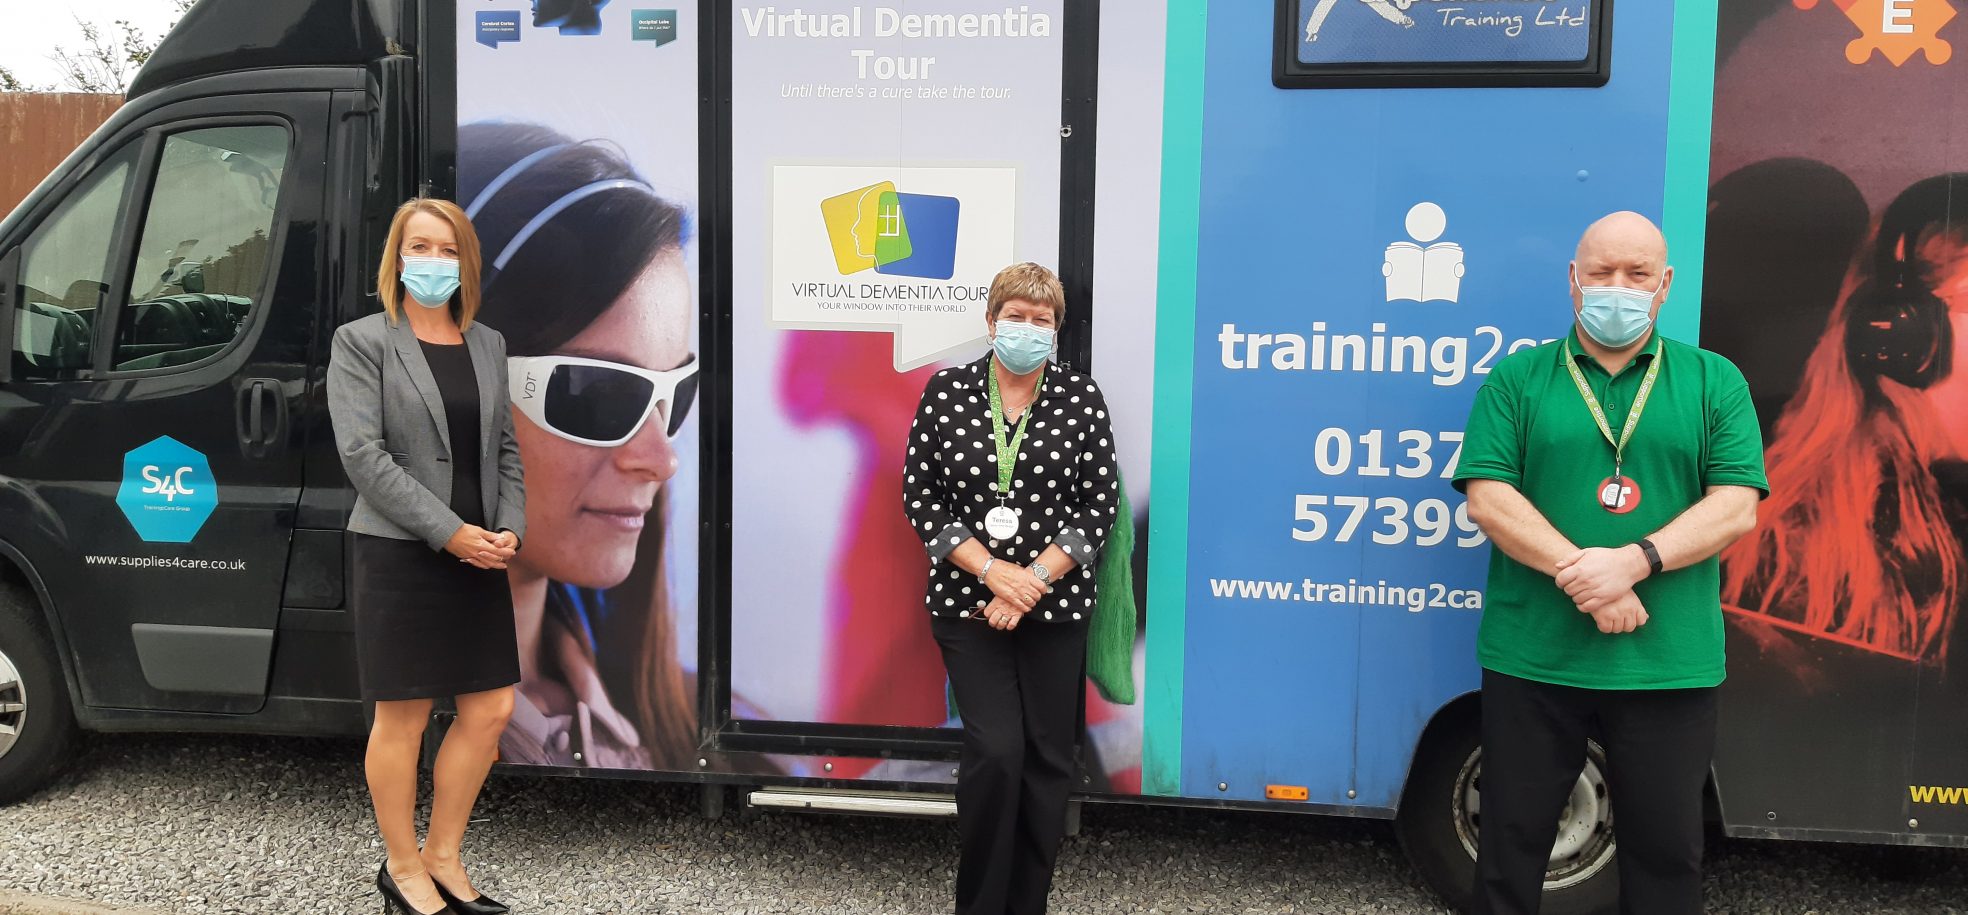 Home Manager Alison Aberdeen, Deputy Home Manager Teresa Picton and Home Trainer Ian Morgan with the Dementia Bus